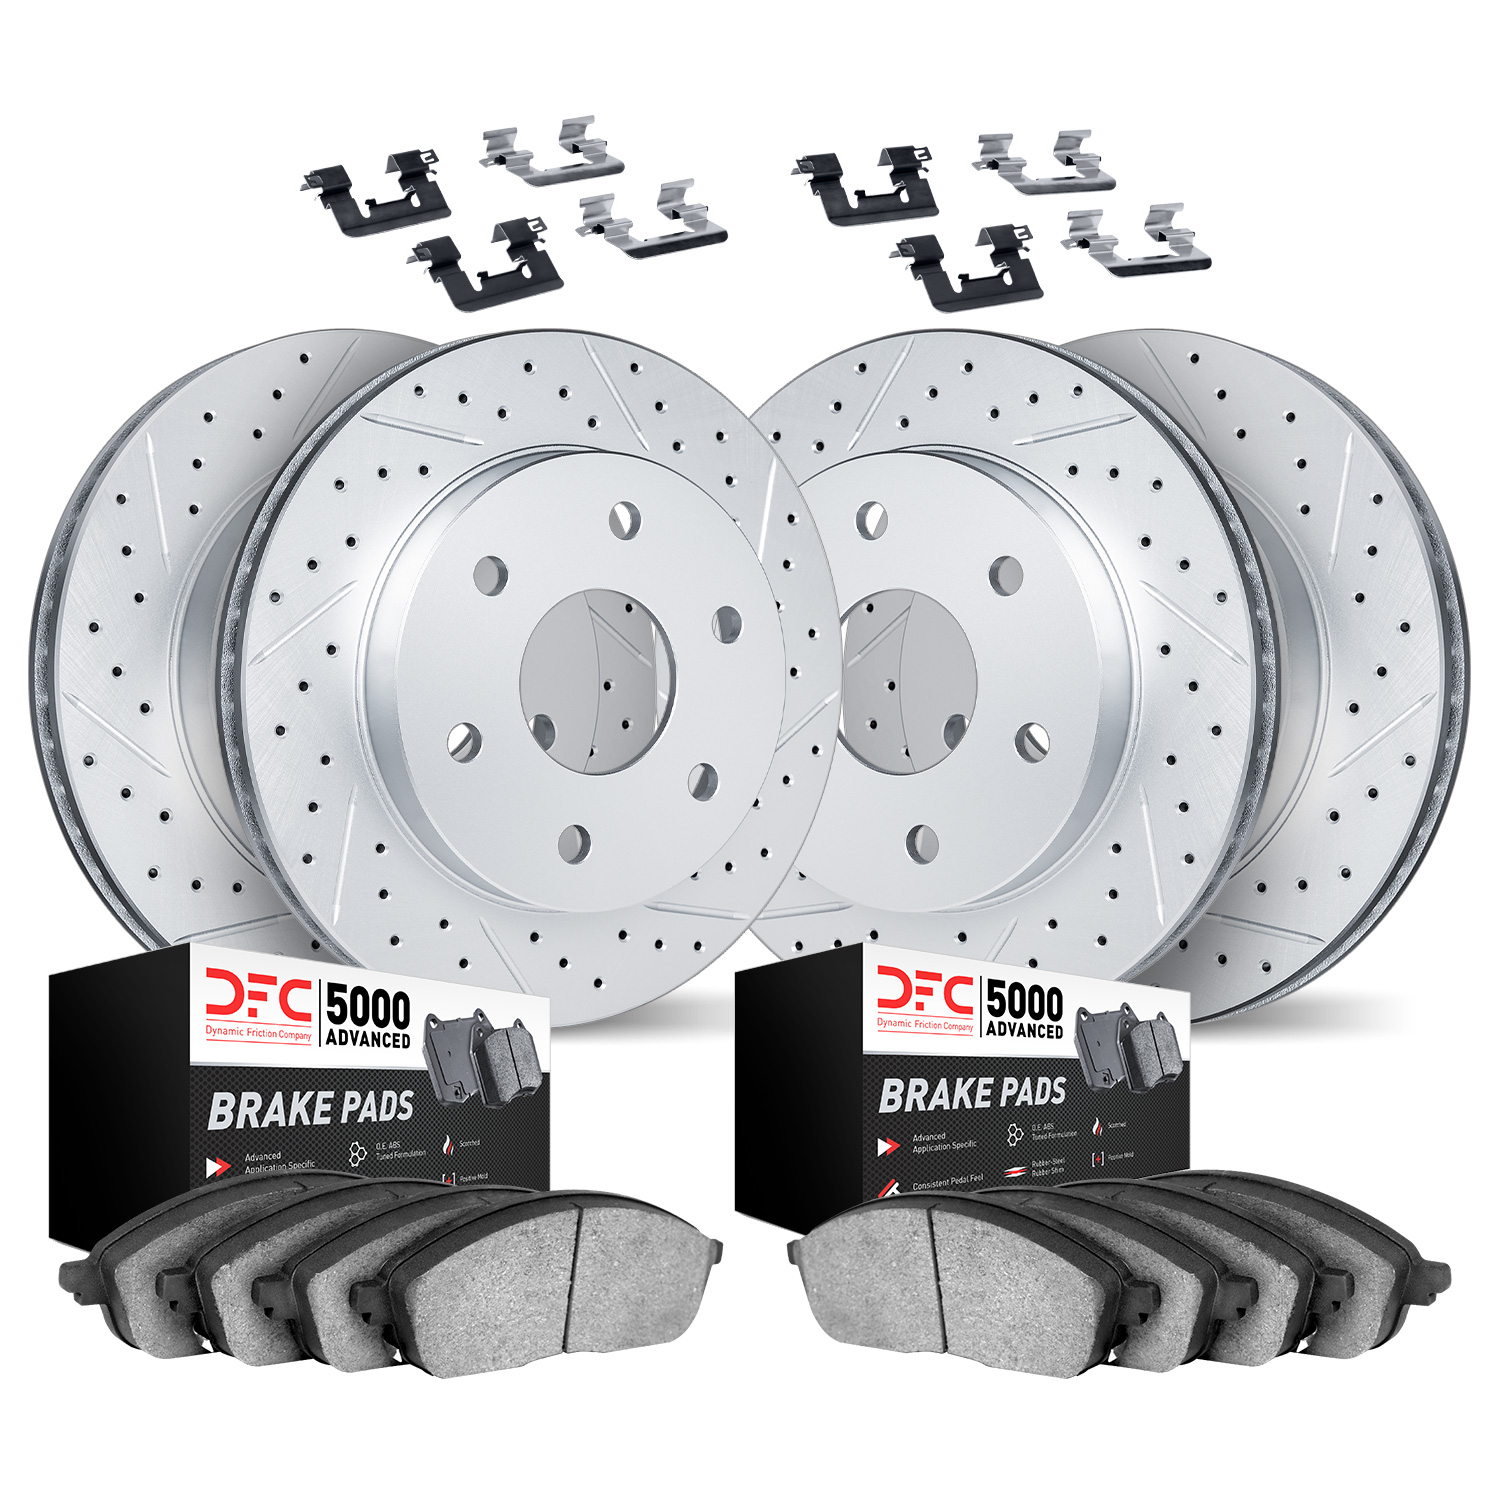 2514-48019 Geoperformance Drilled/Slotted Rotors w/5000 Advanced Brake Pads Kit & Hardware, 1999-2007 GM, Position: Front and Re